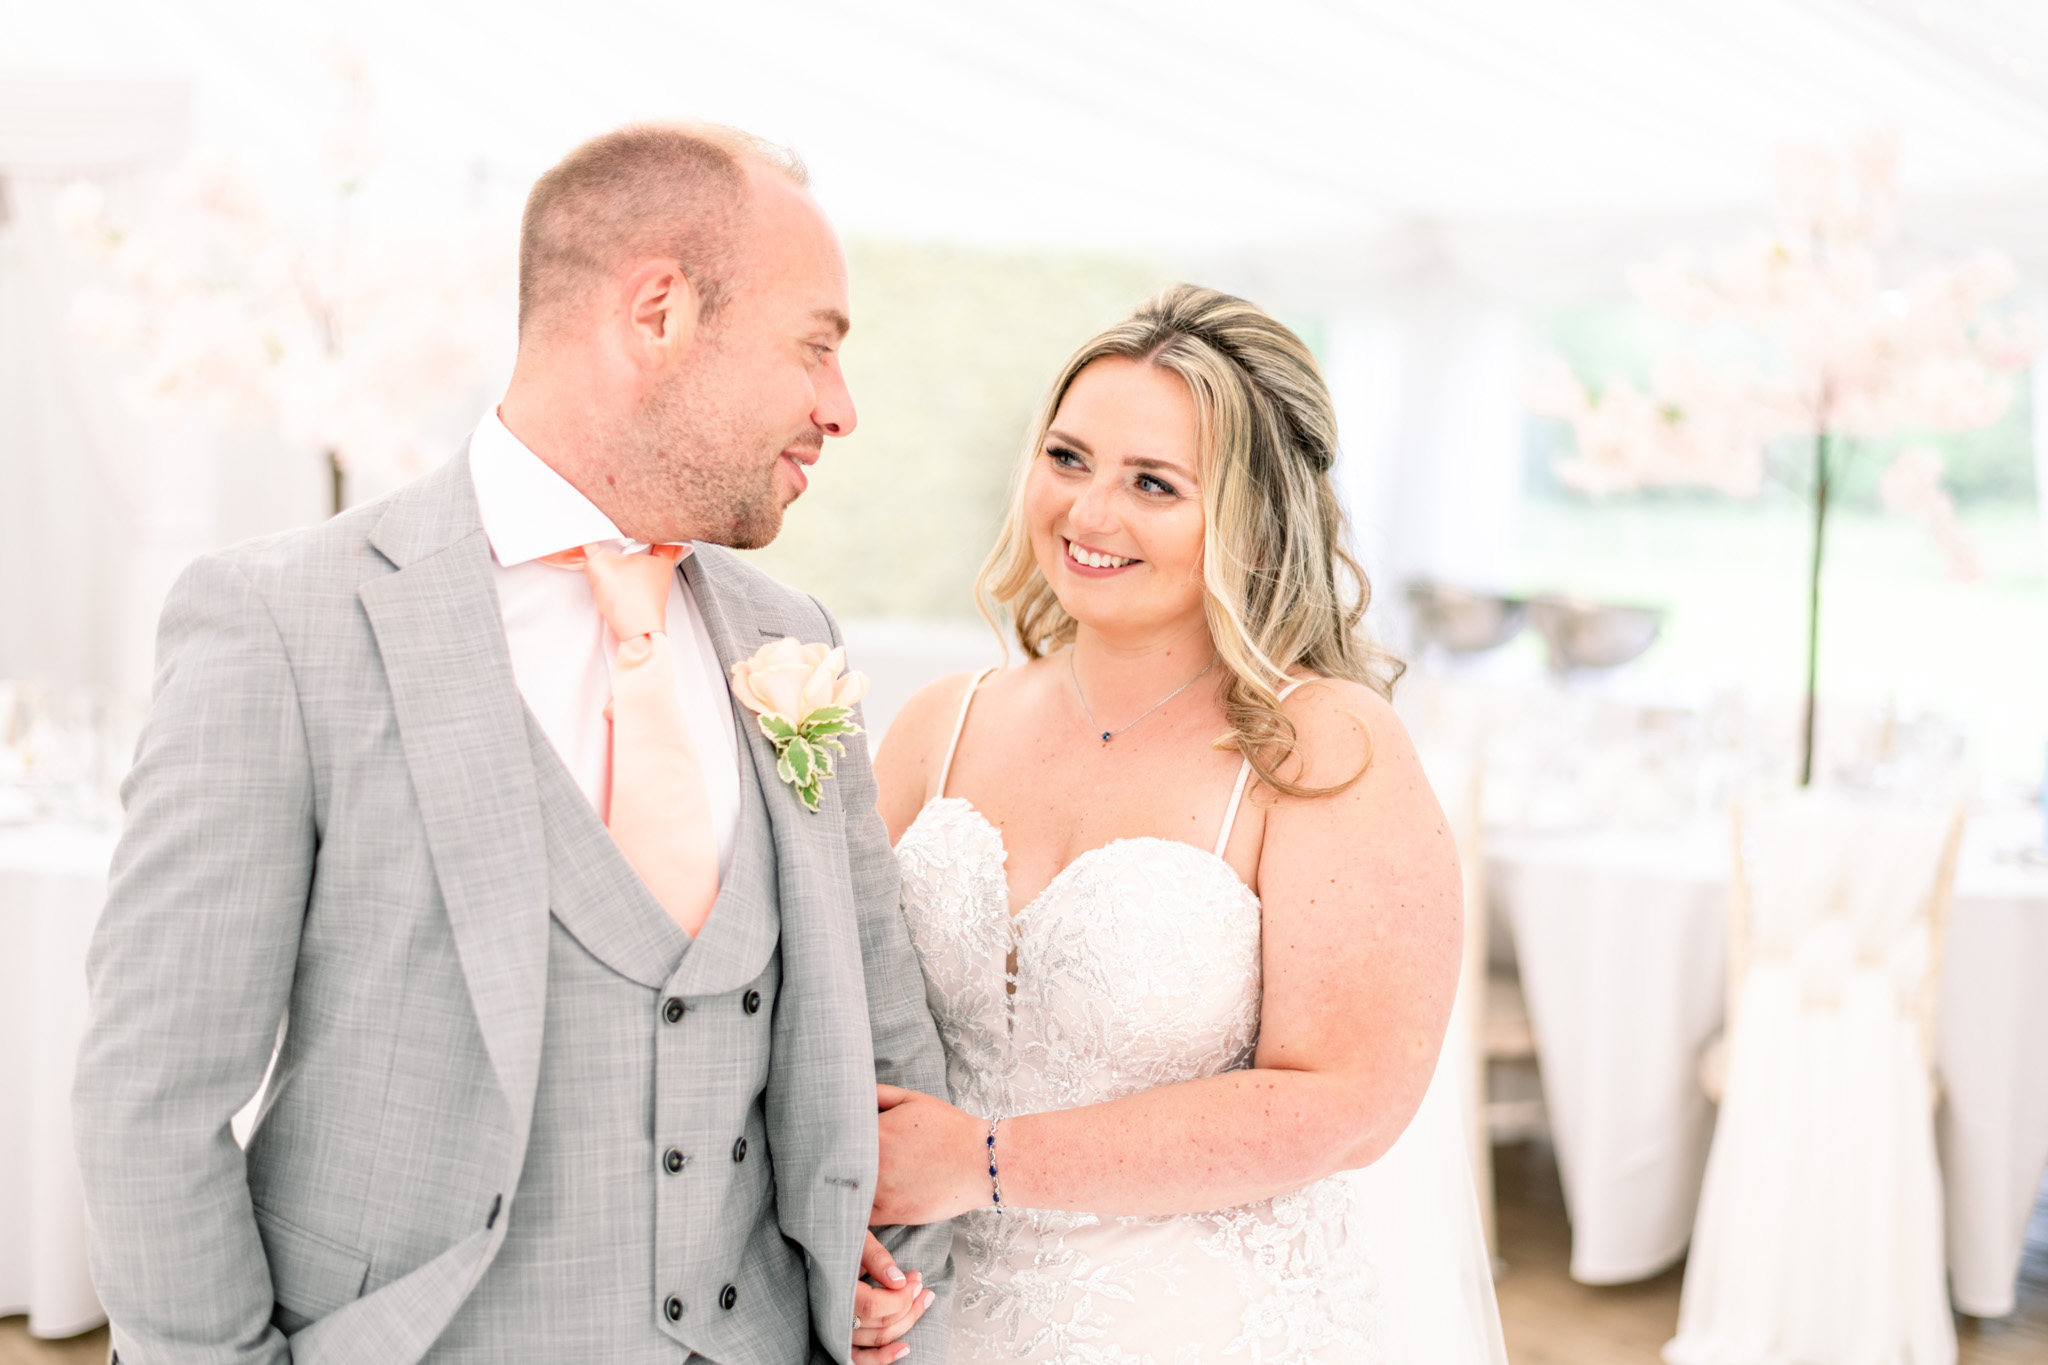 https://usercontent.one/wp/www.natalieandmax.co.uk/wp-content/uploads/2022/06/RA-That-Amazing-Place-Wedding-Photography-by-Natalie-and-Max-Photo-and-Films-508.jpg?media=1711985334